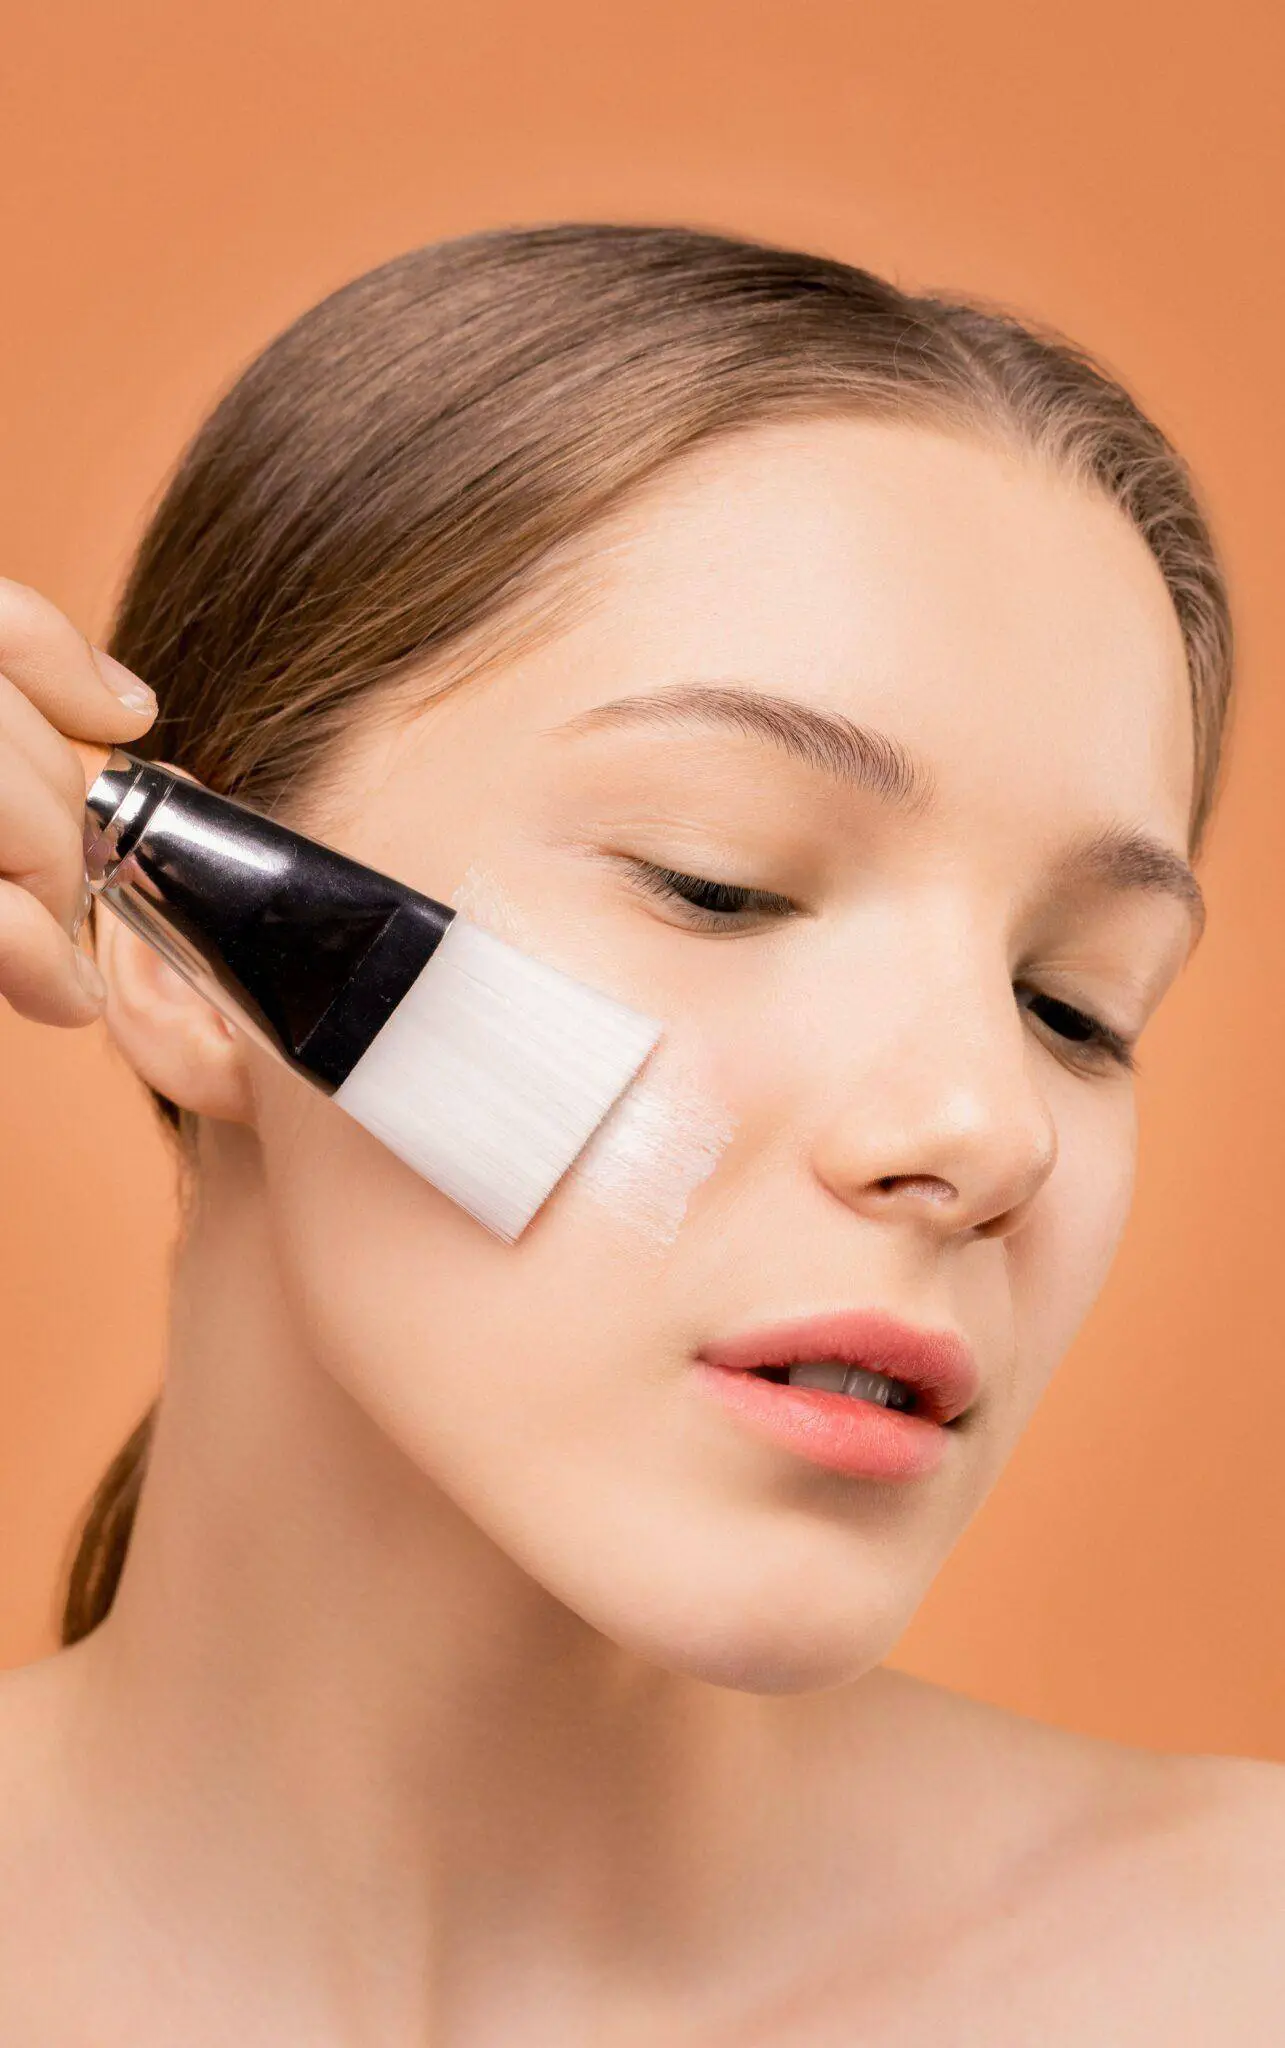 Learn To Use Lactic Acid For The Skin In 4 Amazing Ways